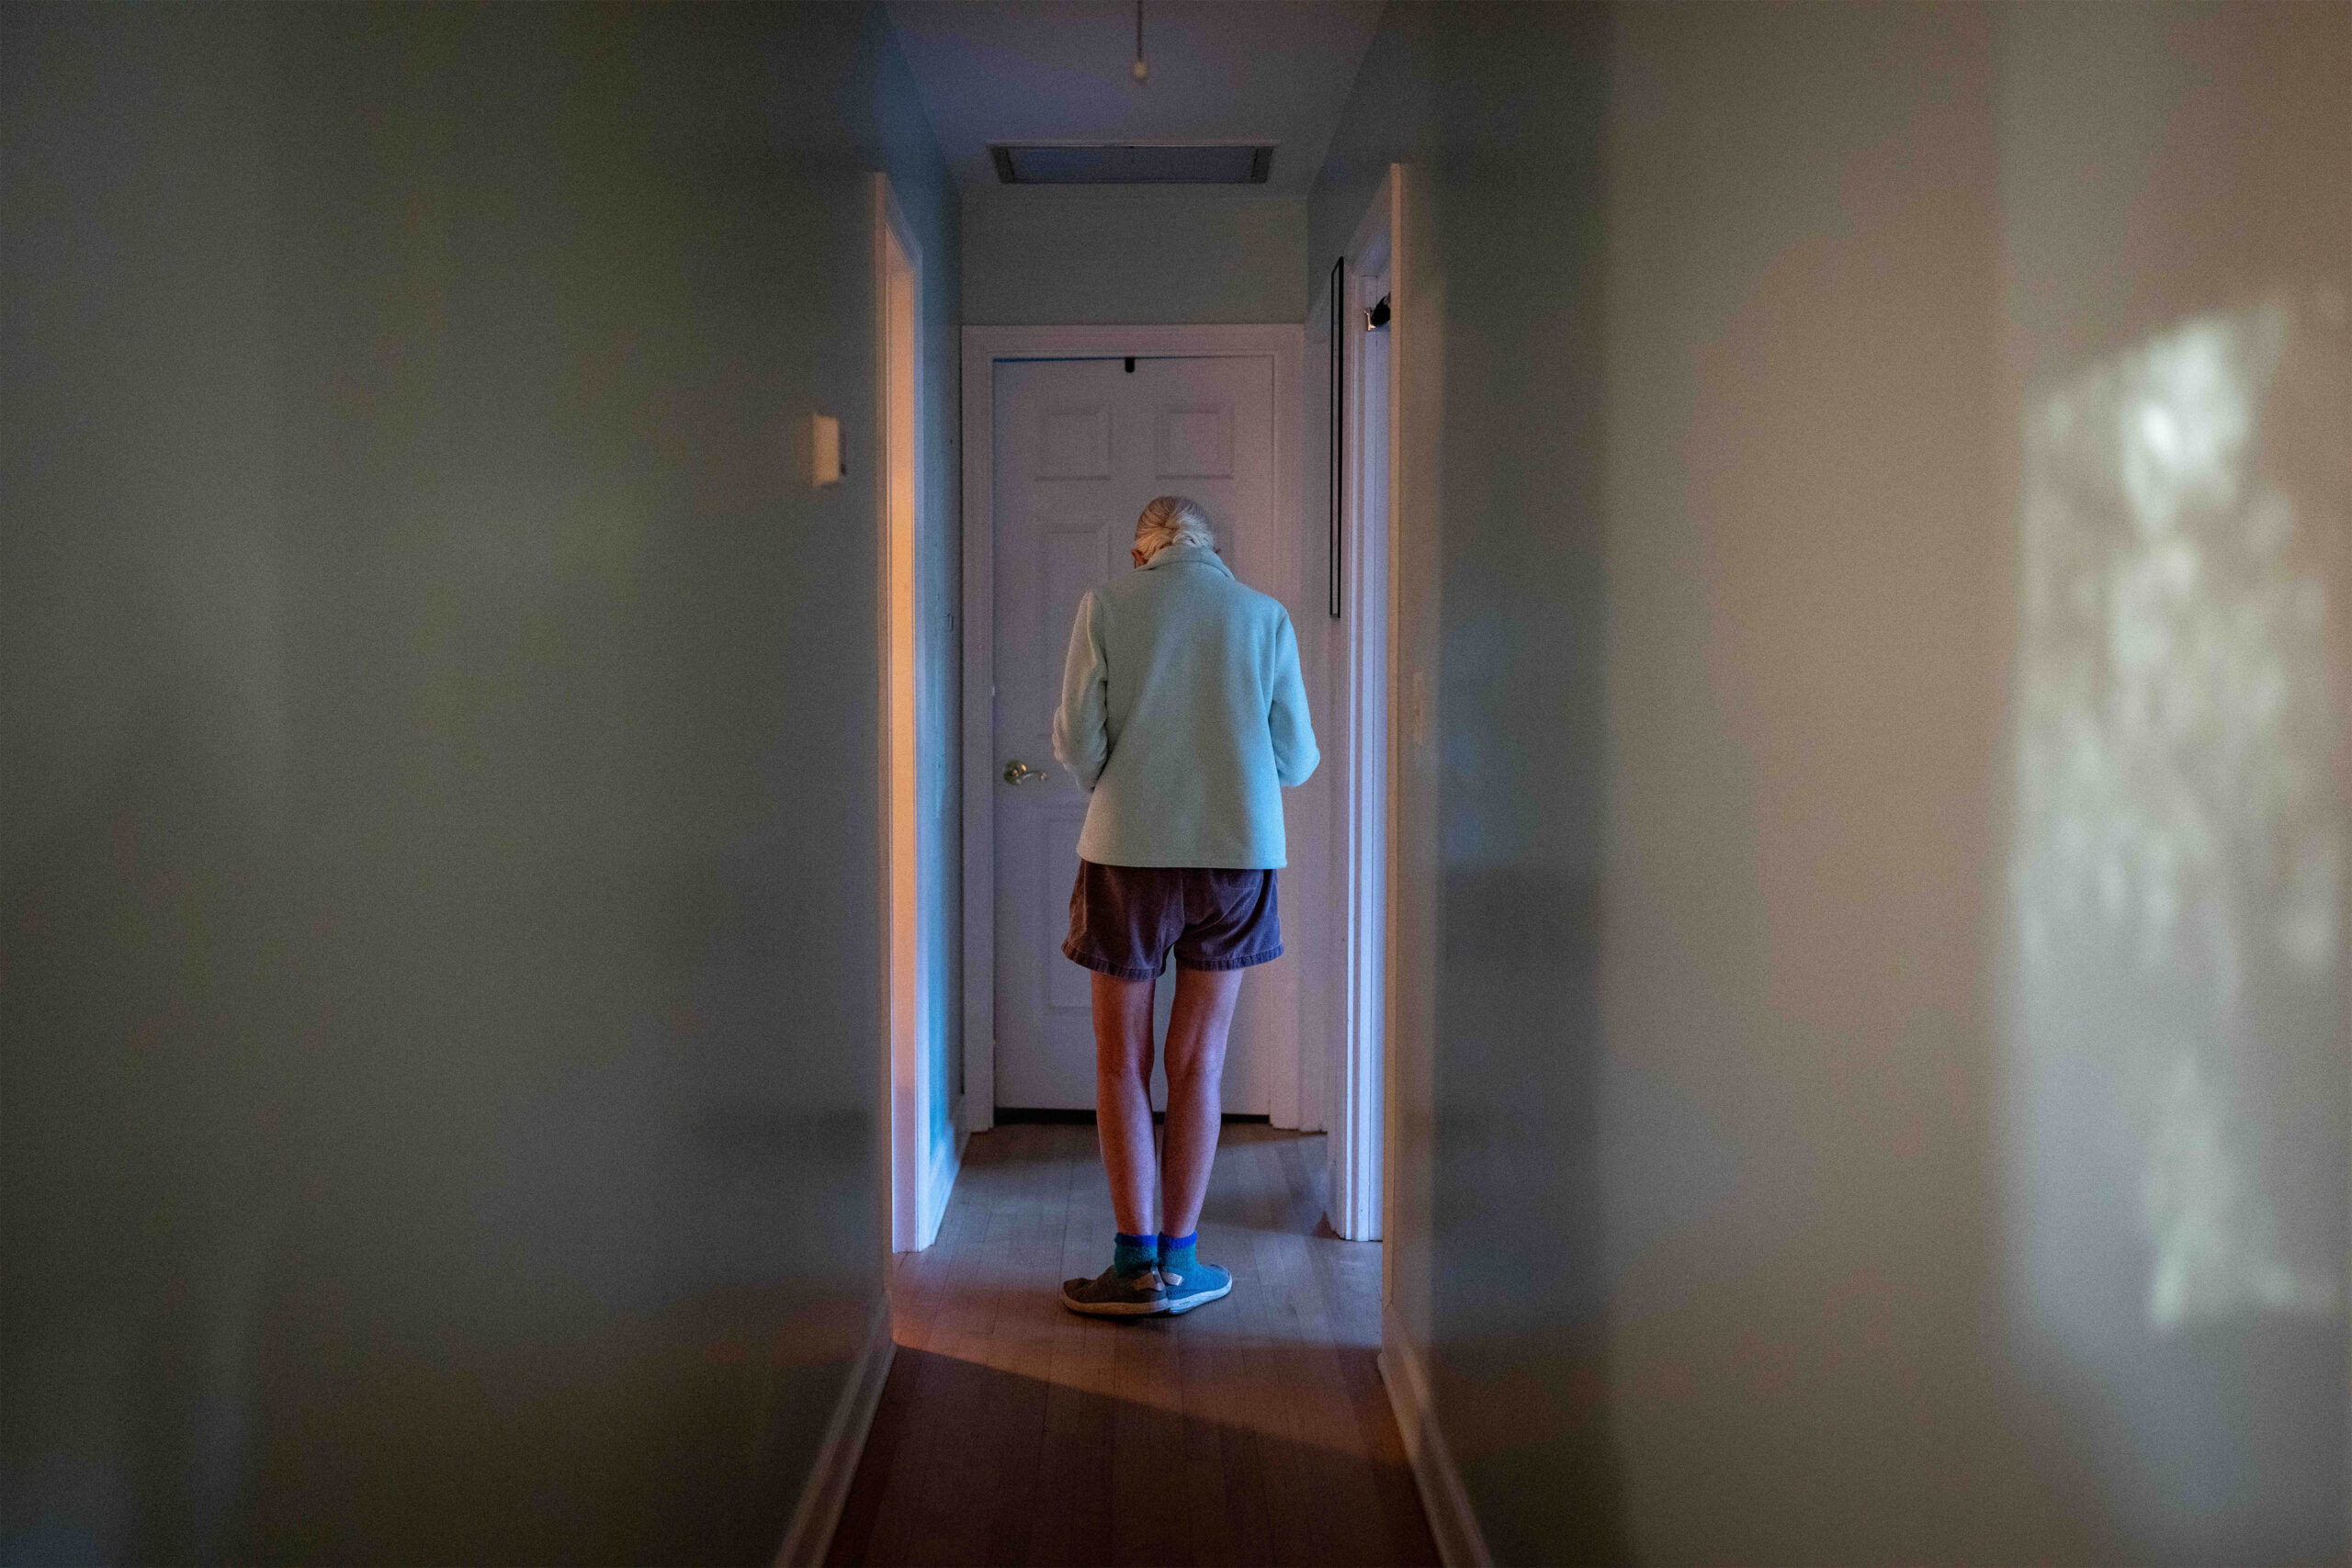 A photo of an elderly woman walking down a hallway indoors.